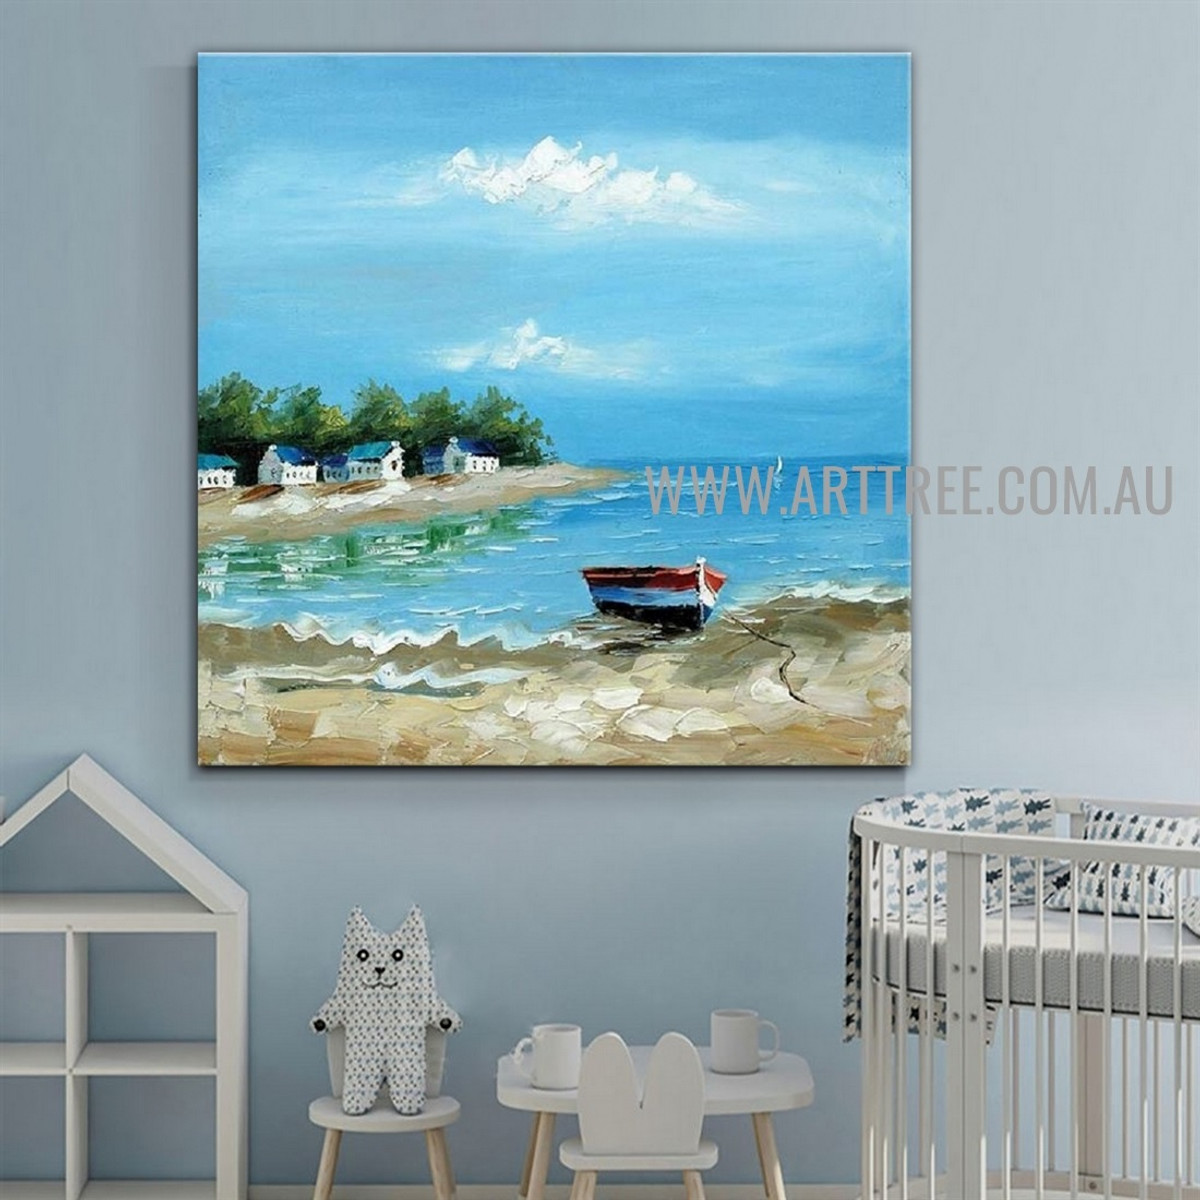 Seaboard Landscape Heavy Texture Artist Handmade Acrylic Nature Painting For Room Wall Assortment